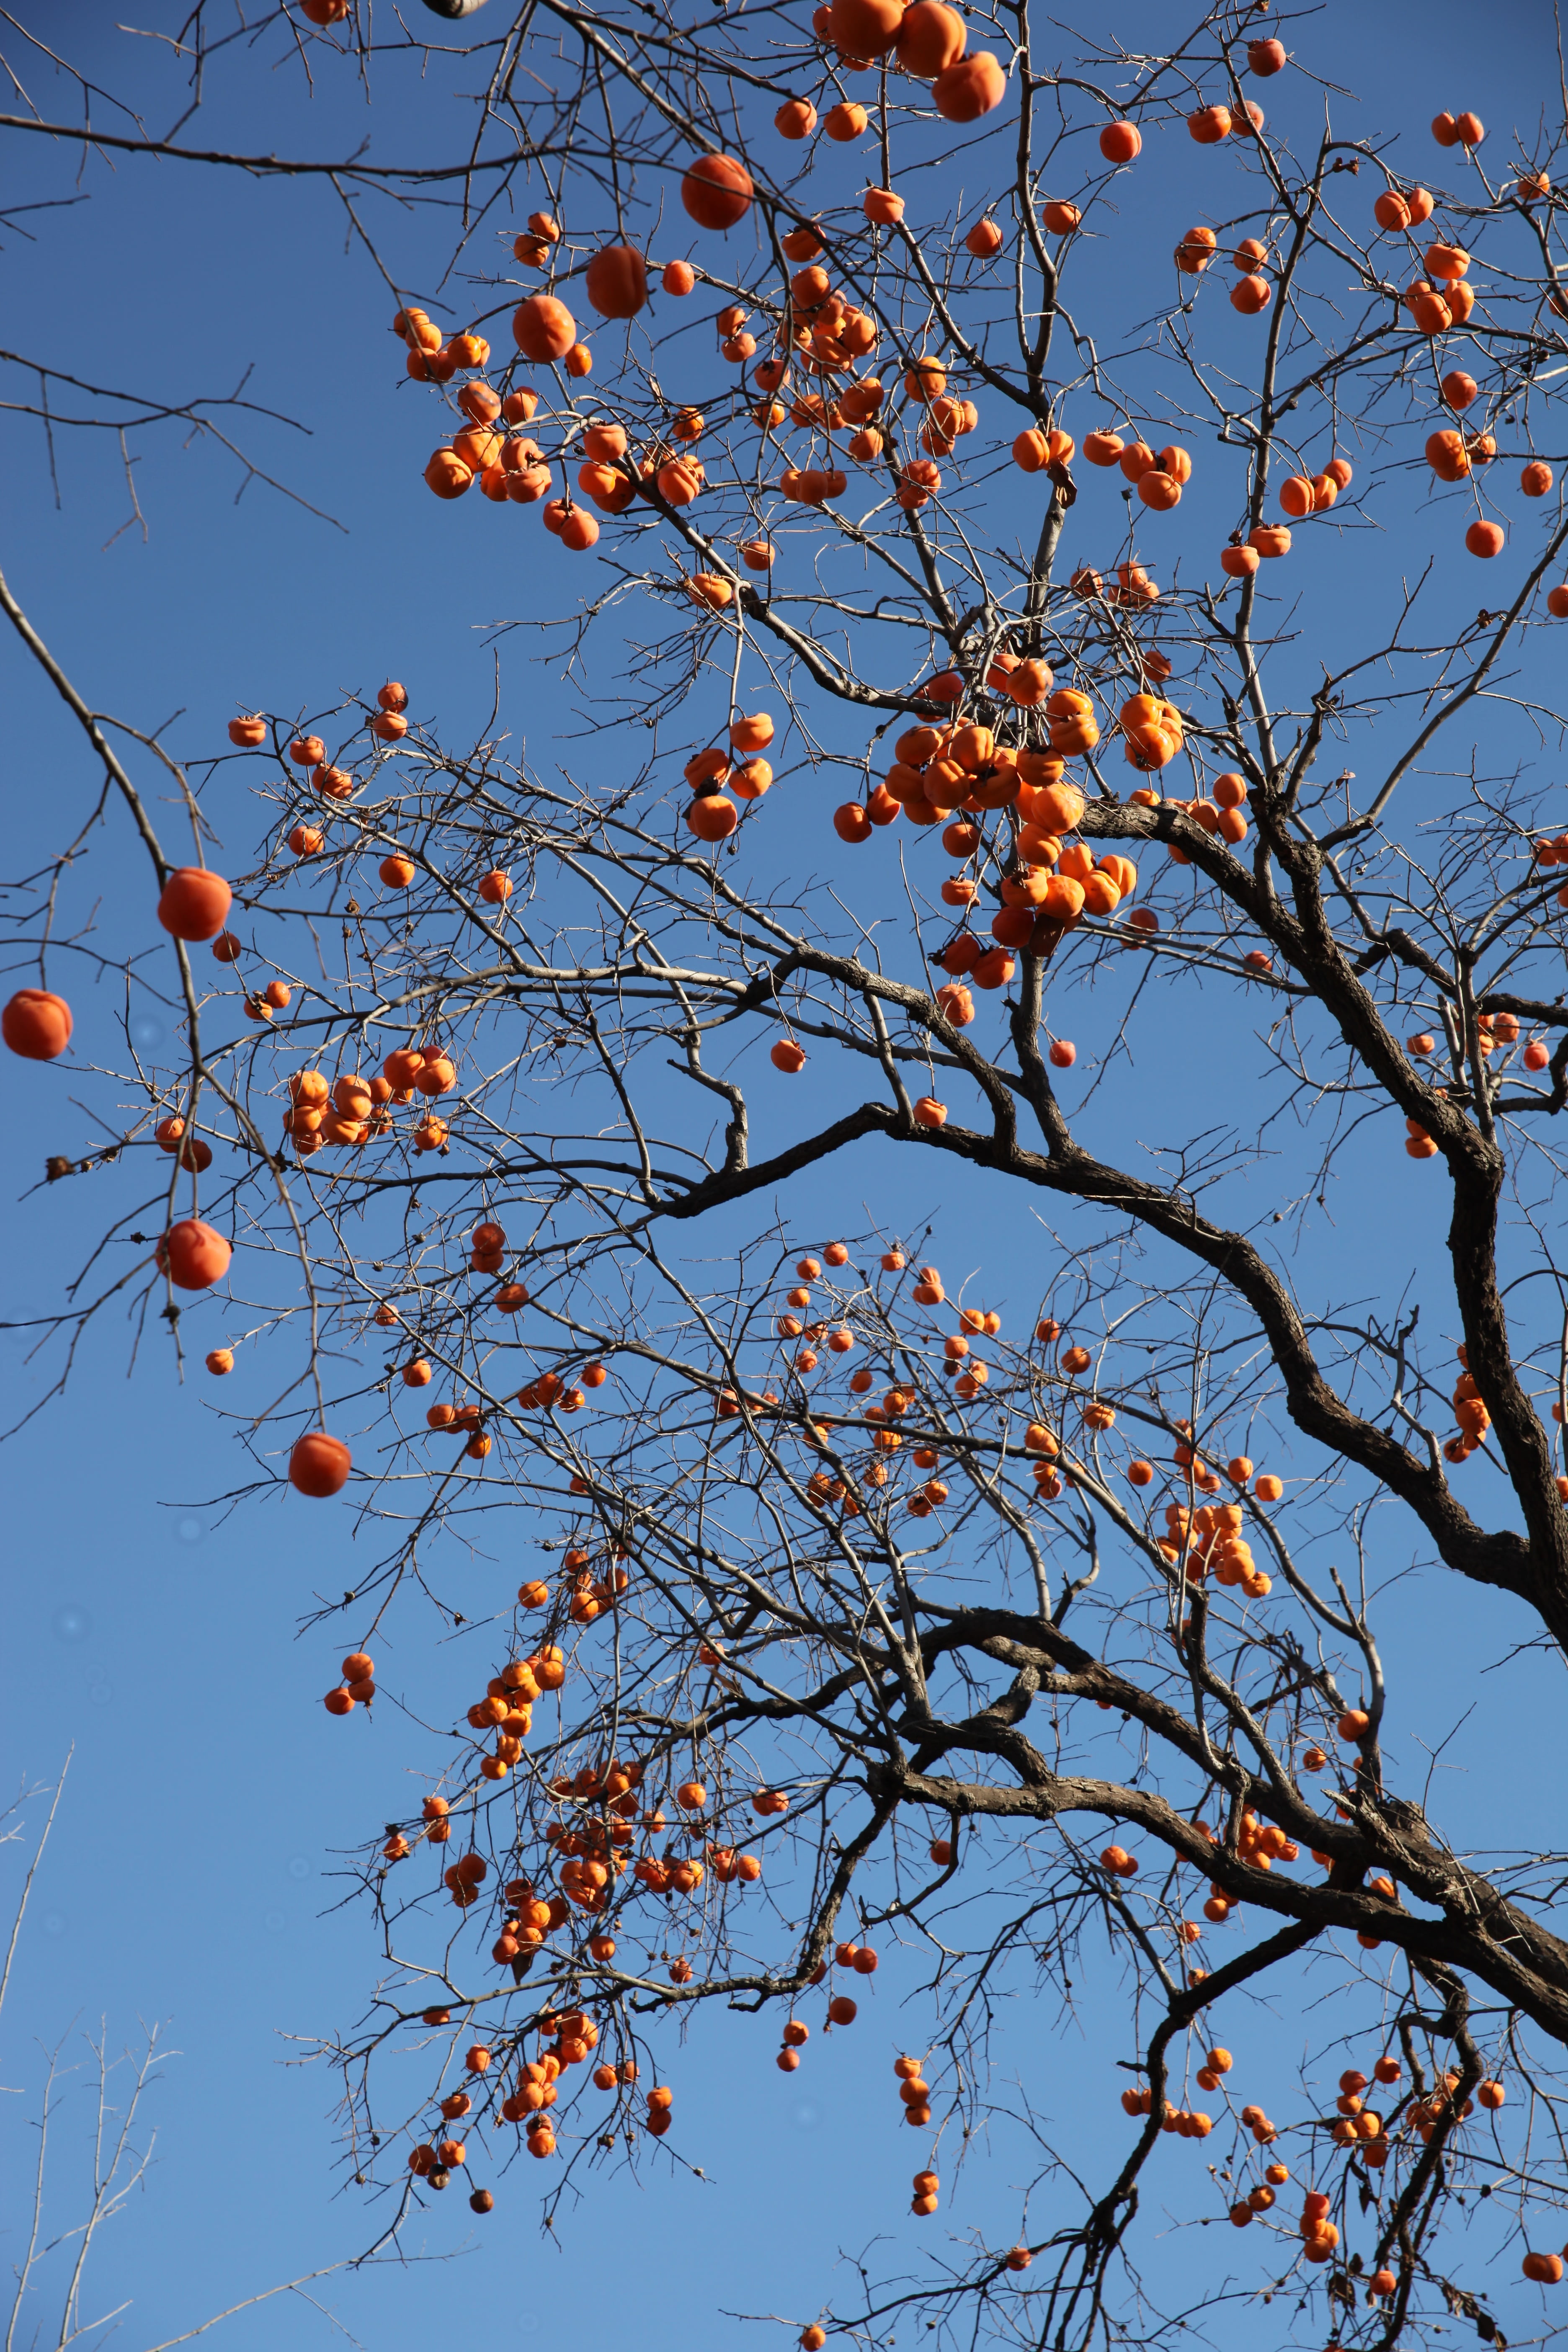 the persimmon tree, fruit trees, fruits, sky, low angle view